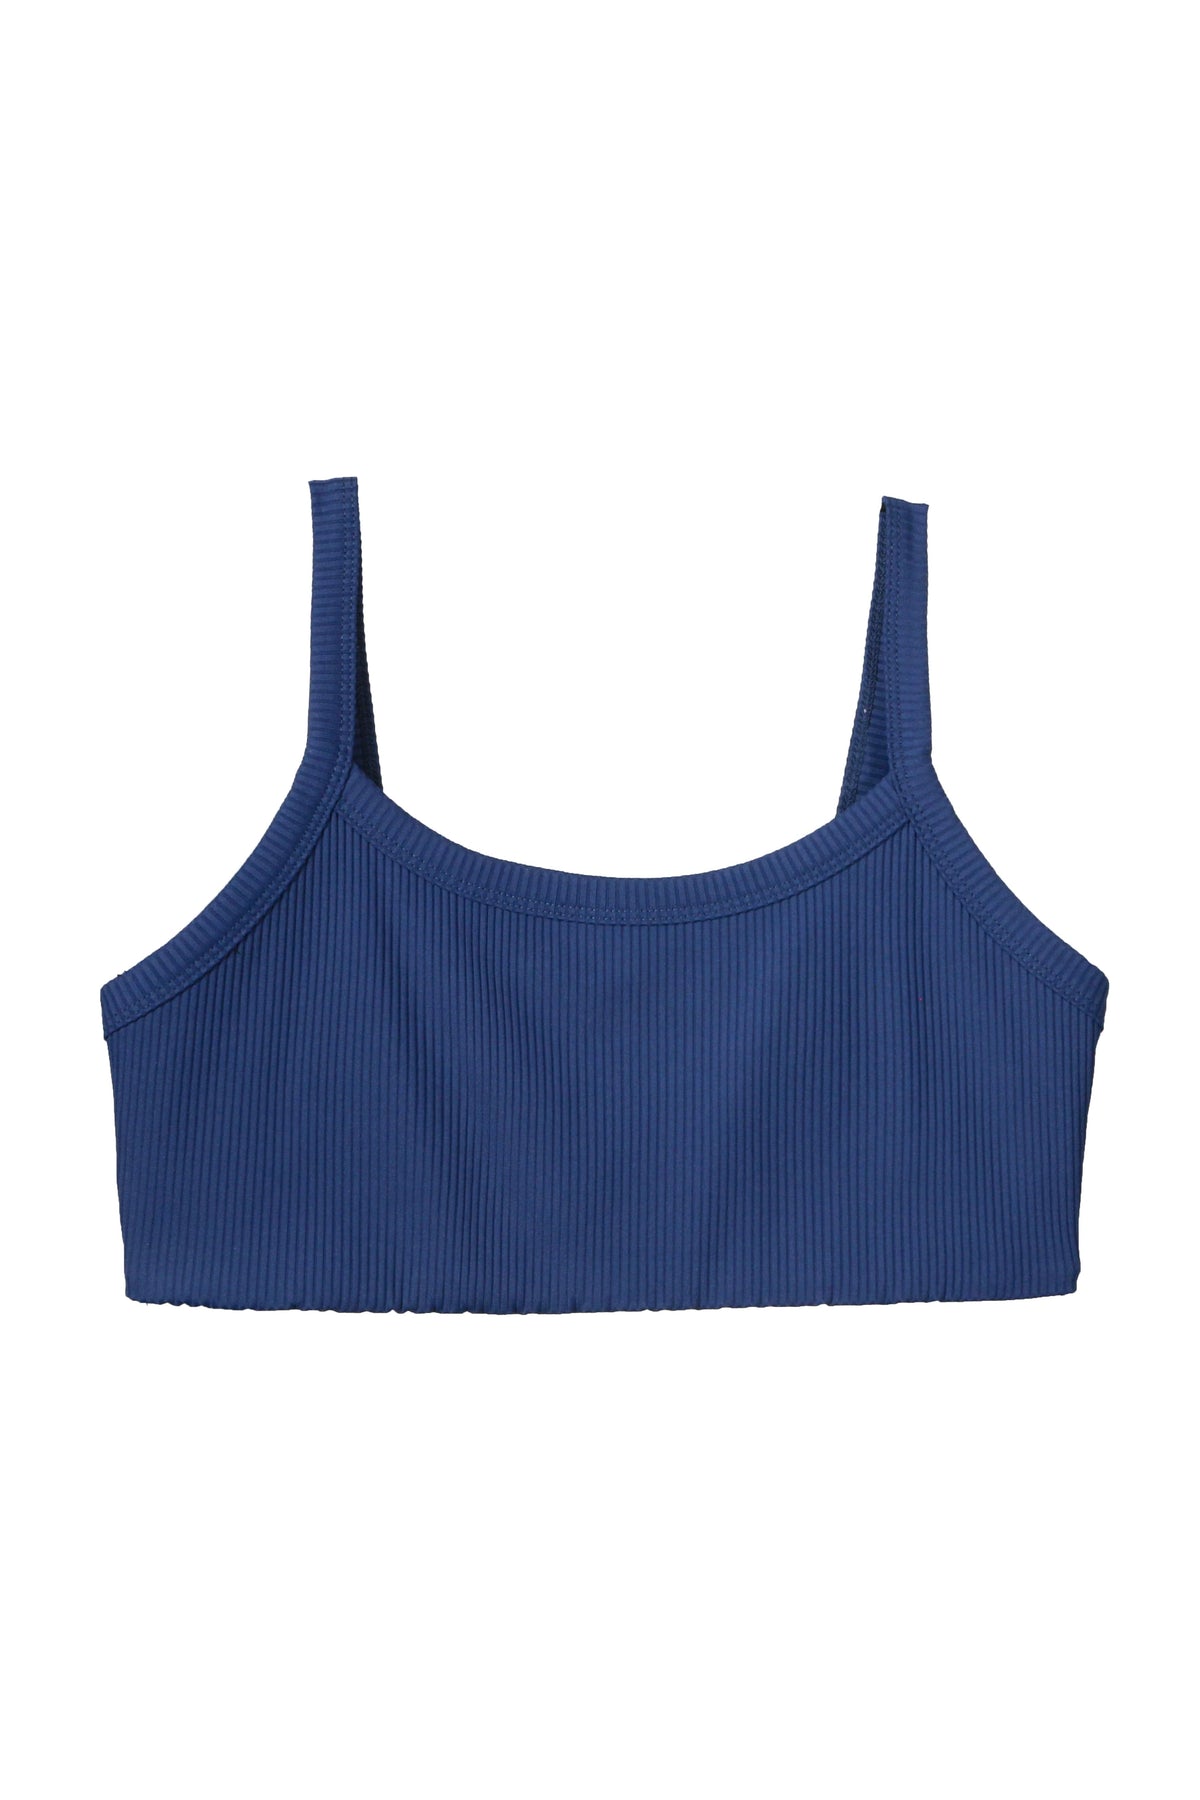 Year of Ours Activewear Navy / S Ribbed 2.0 Bralette- Navy